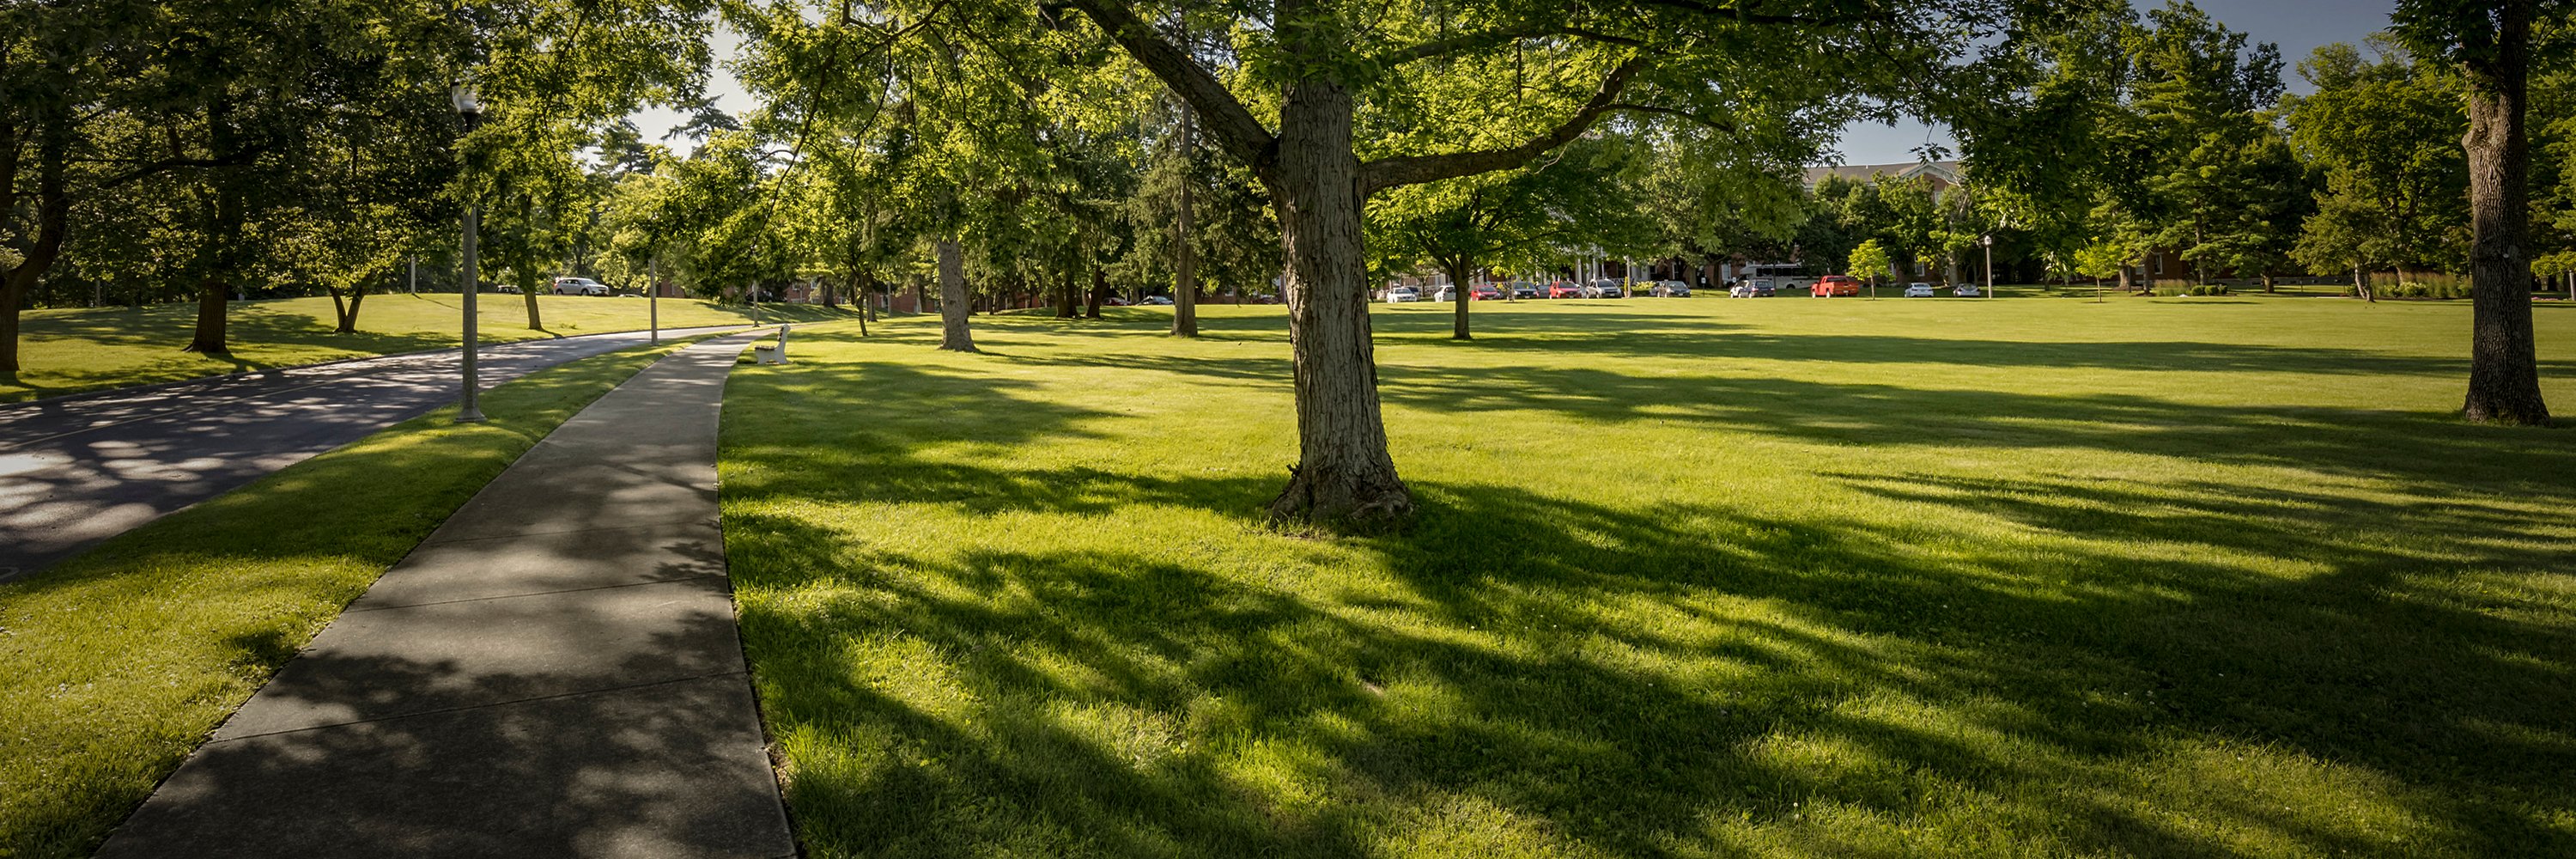 The-beautiful-green-lawns-at-10-Wilmington-Place_3000x1000